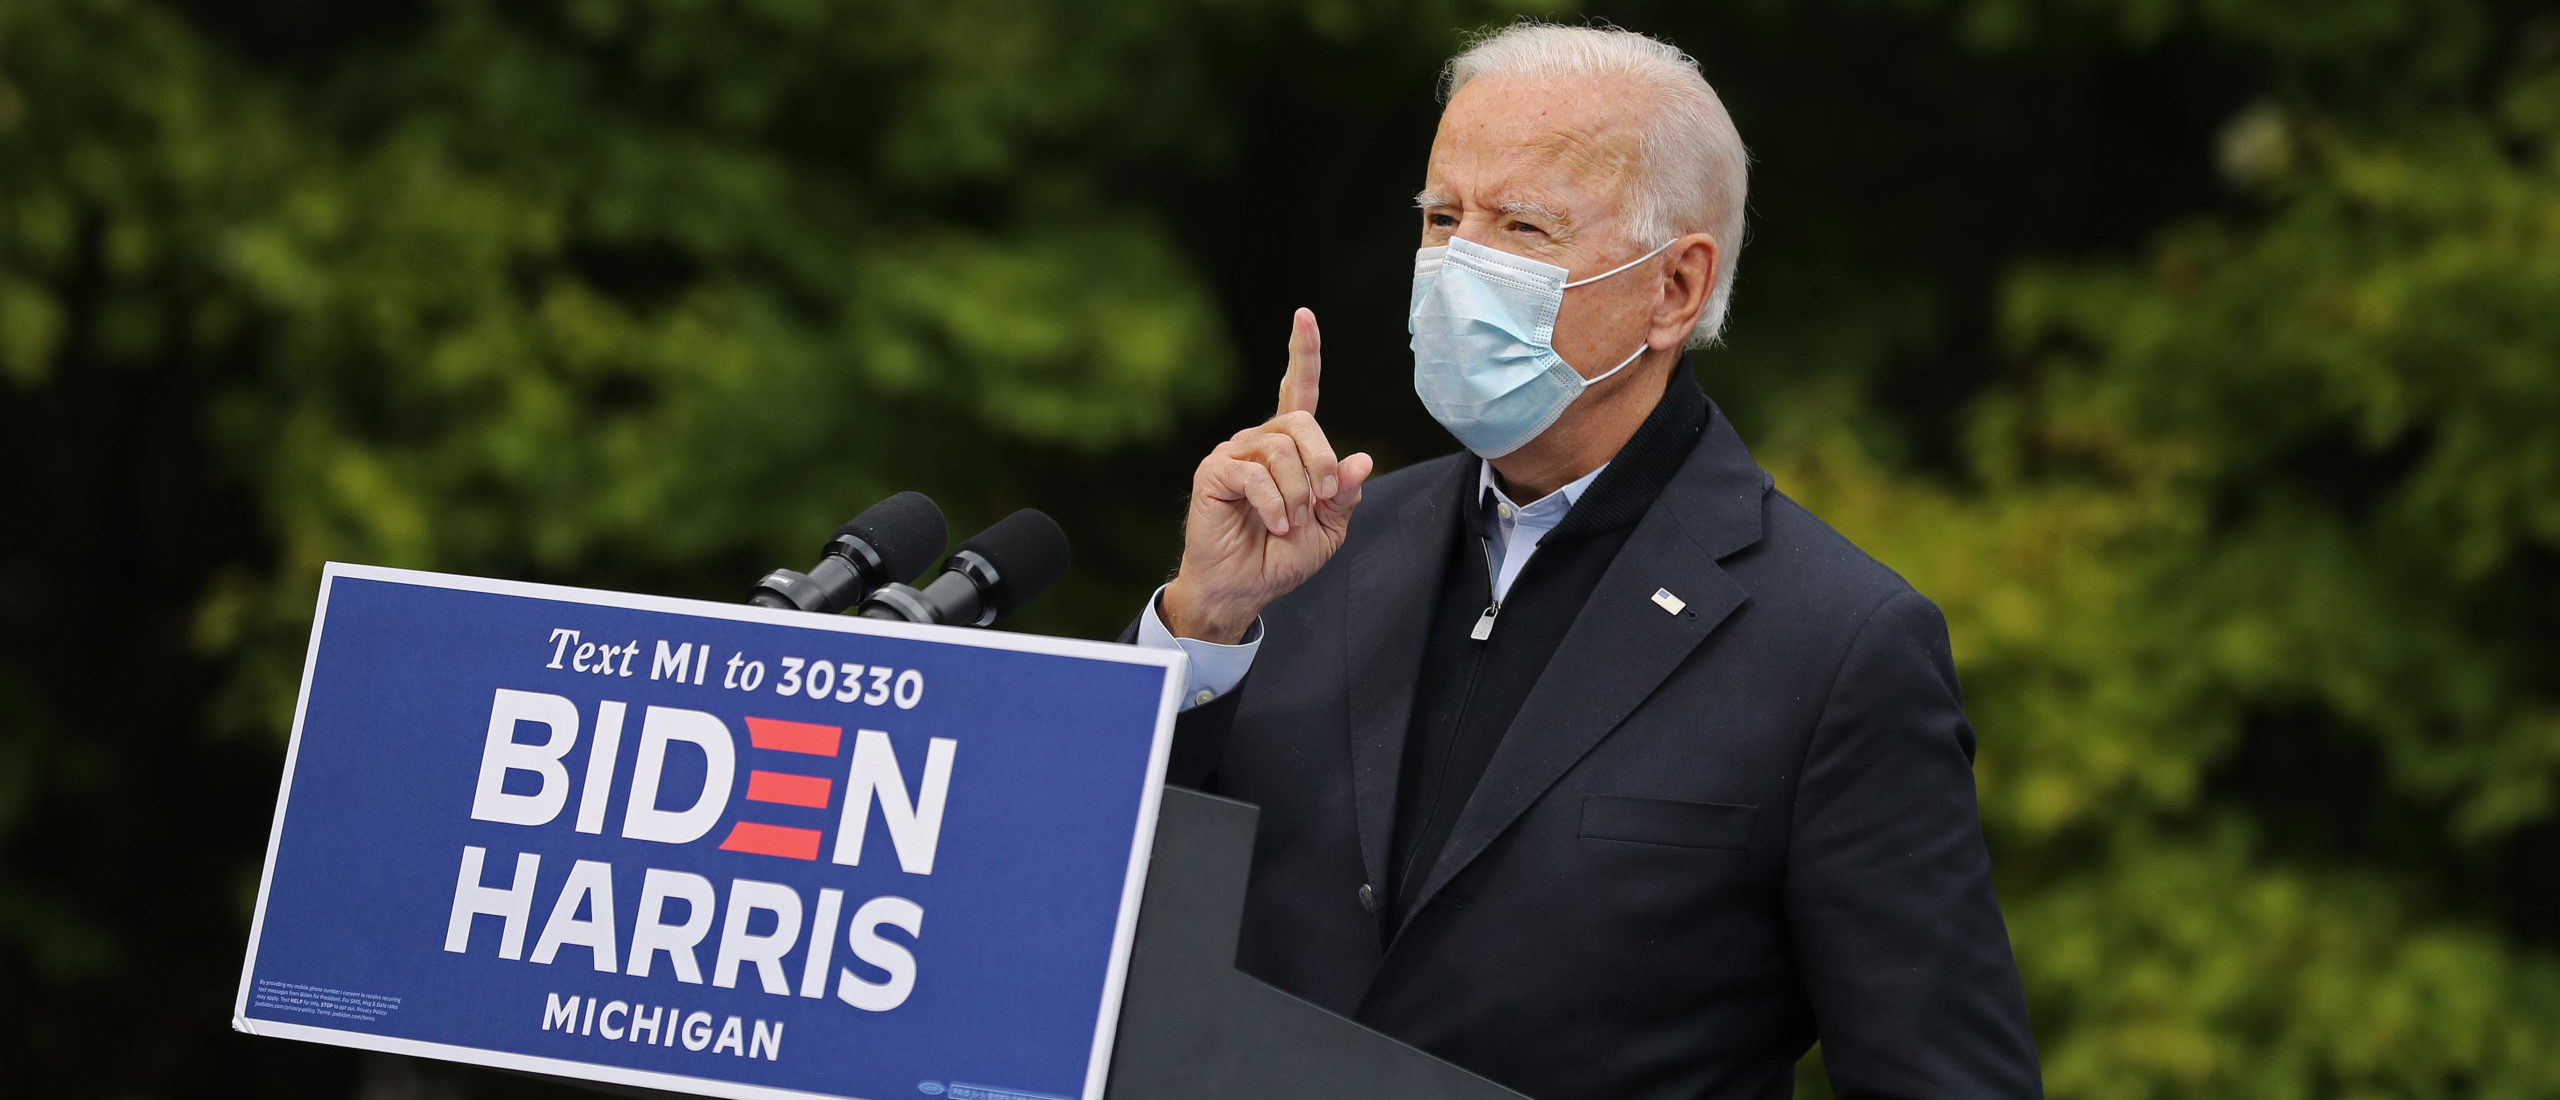 GRAND RAPIDS, MICHIGAN - OCTOBER 02: Democratic presidential nominee Joe Biden delivers remarks in the parking lot of the United Food and Commercial Workers International Union Local 951 while campaigning October 02, 2020 in Grand Rapids, Michigan. (Photo by Chip Somodevilla/Getty Images)